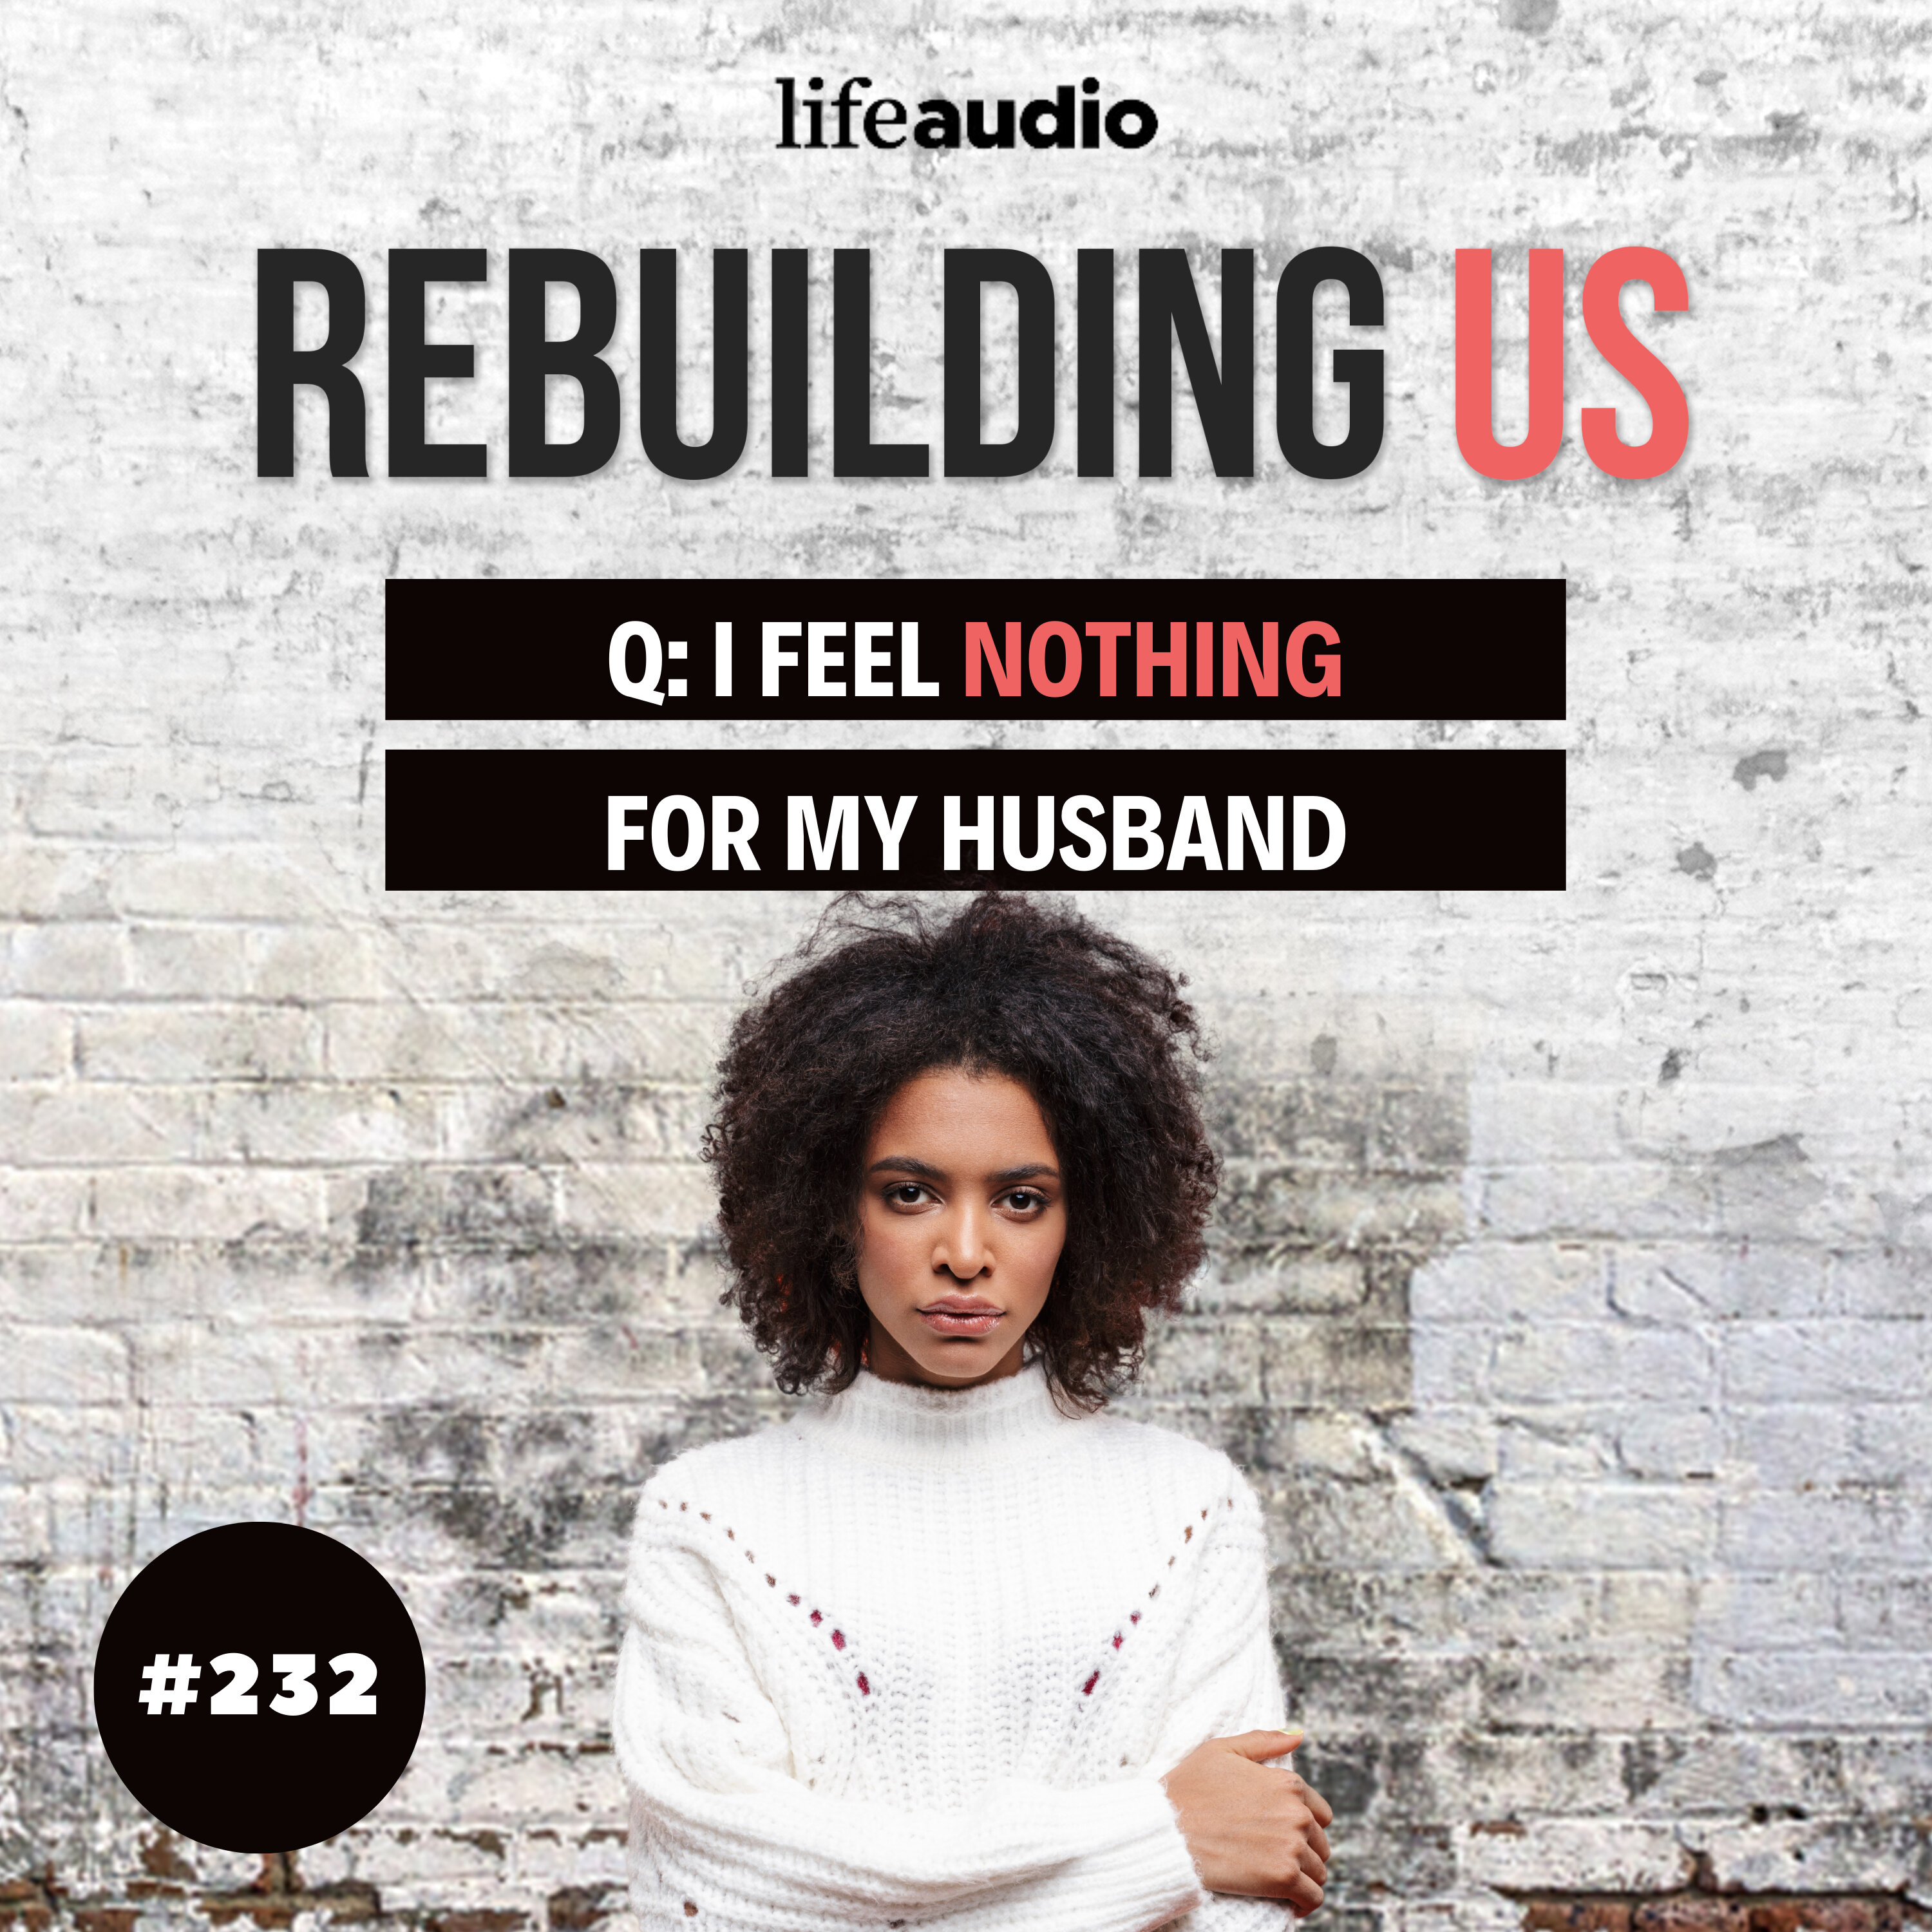 Q & A: I Feel Nothing For My Spouse & We’re Living Separate Lives